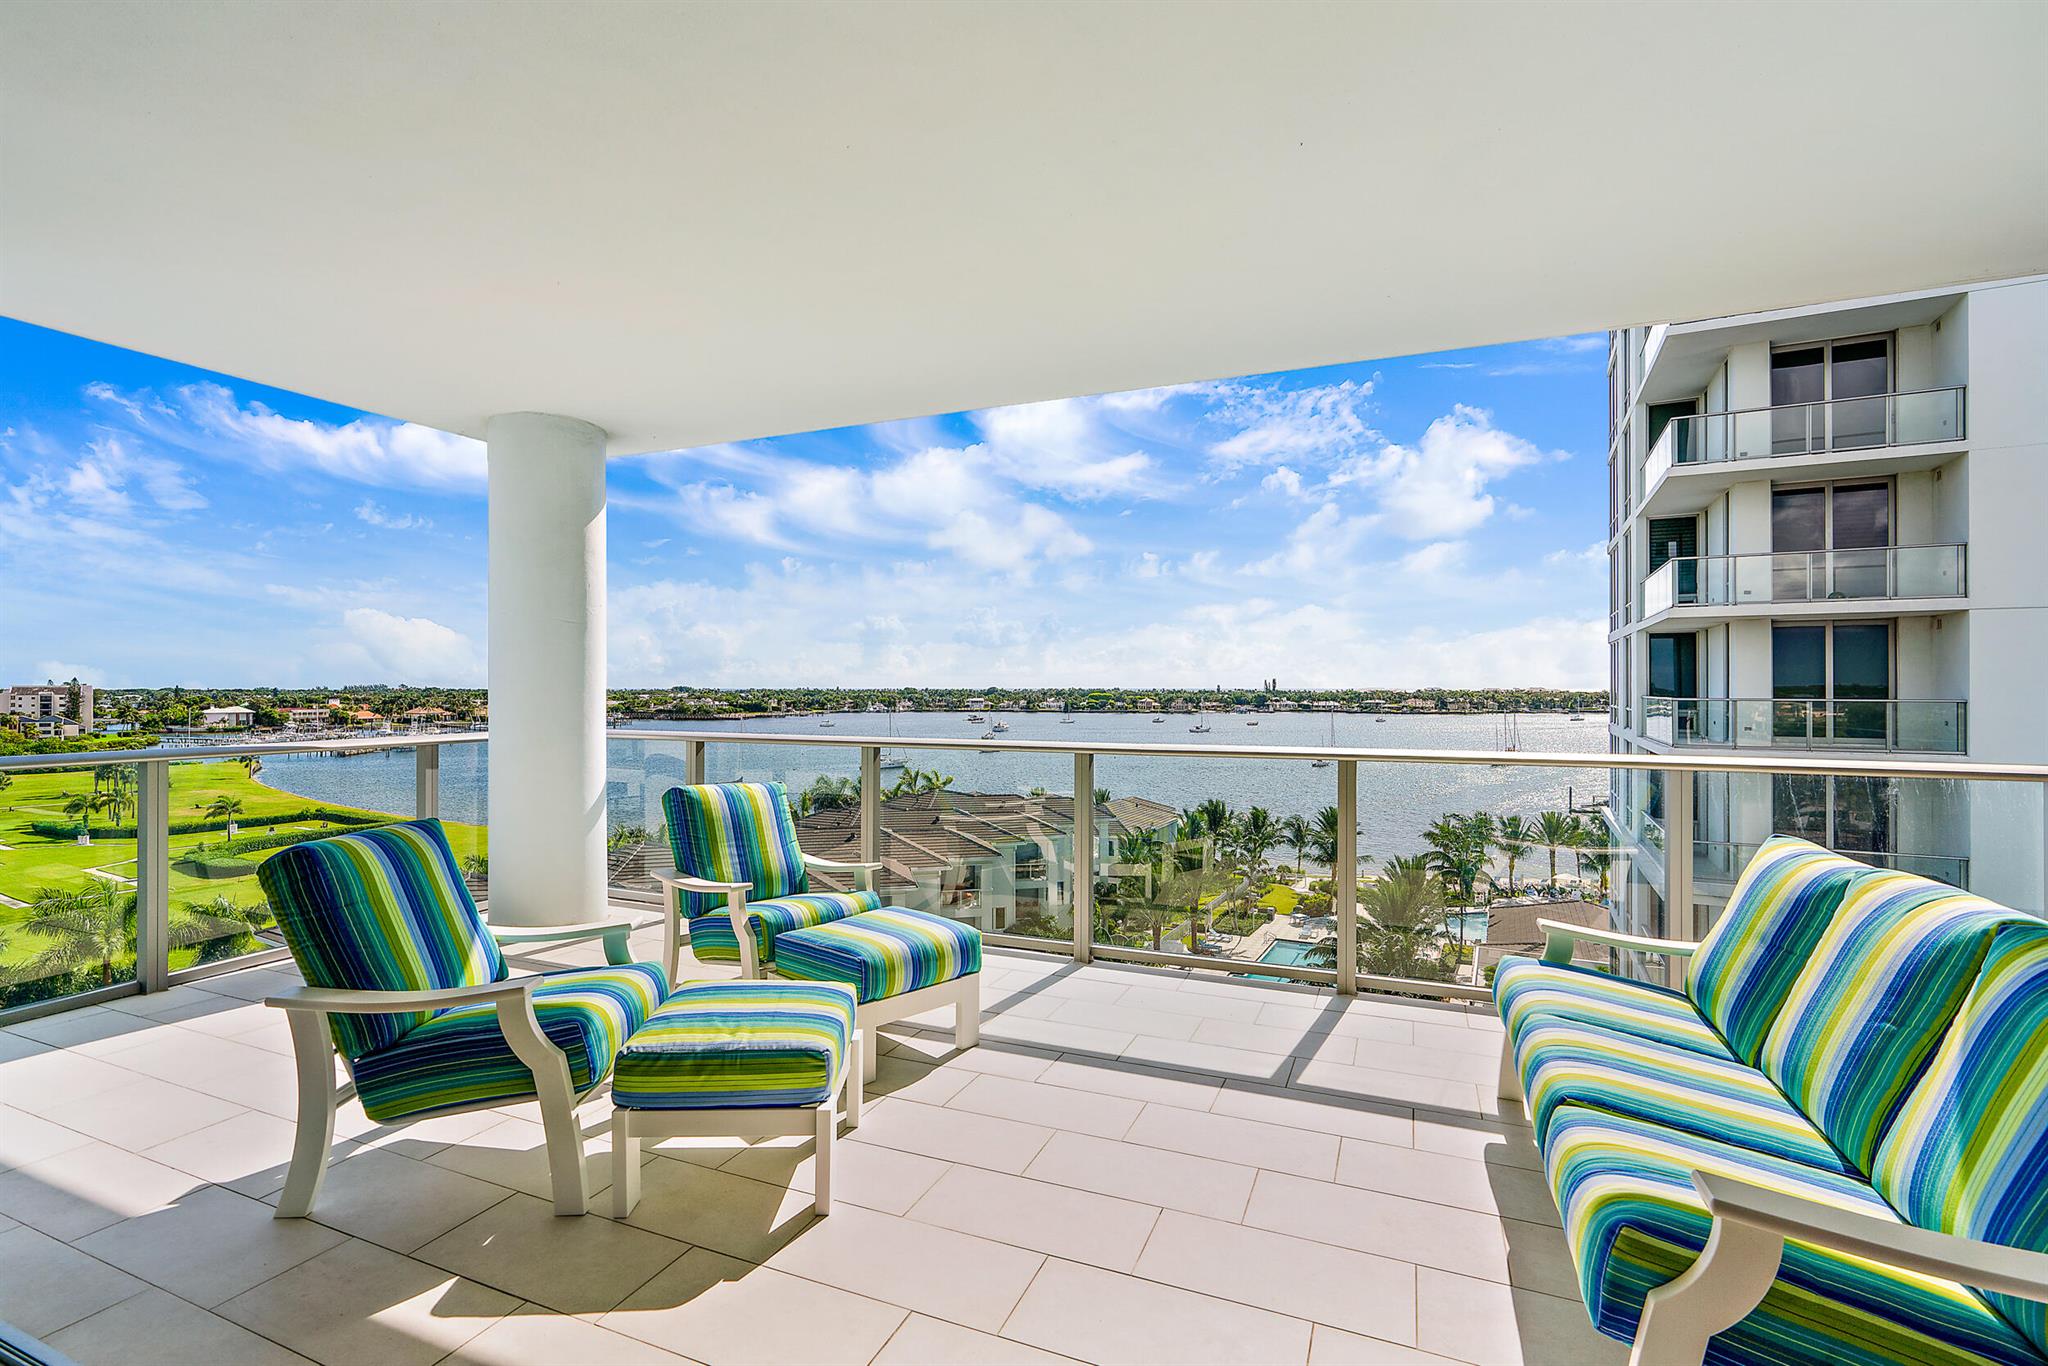 Spectacular Intracoastal & Ocean Views! 7th floor furnished unit w/ beautiful water views to enjoy both the sunrise and sunset from one of your 2 oversized covered terraces. 3 bedrooms plus den/office with 4 full baths, Quartz countertops in kitchen, porcelain flooring throughout, private foyer entry and plenty of light with floor to ceiling windows in every room, complete impact glass and electric shades in every room. Water Club of North Palm Beach is a luxury intracoastal community w/ 24 hour concierge, garage parking for 2 cars, modern fitness center, including a Pilates/Yoga studio, lap pool and waterfront resort-style pool, hot tub, saunas and an outdoor fire pit. Located just minutes from the best beaches, fantastic restaurants & shopping. Available with 180 day lease.